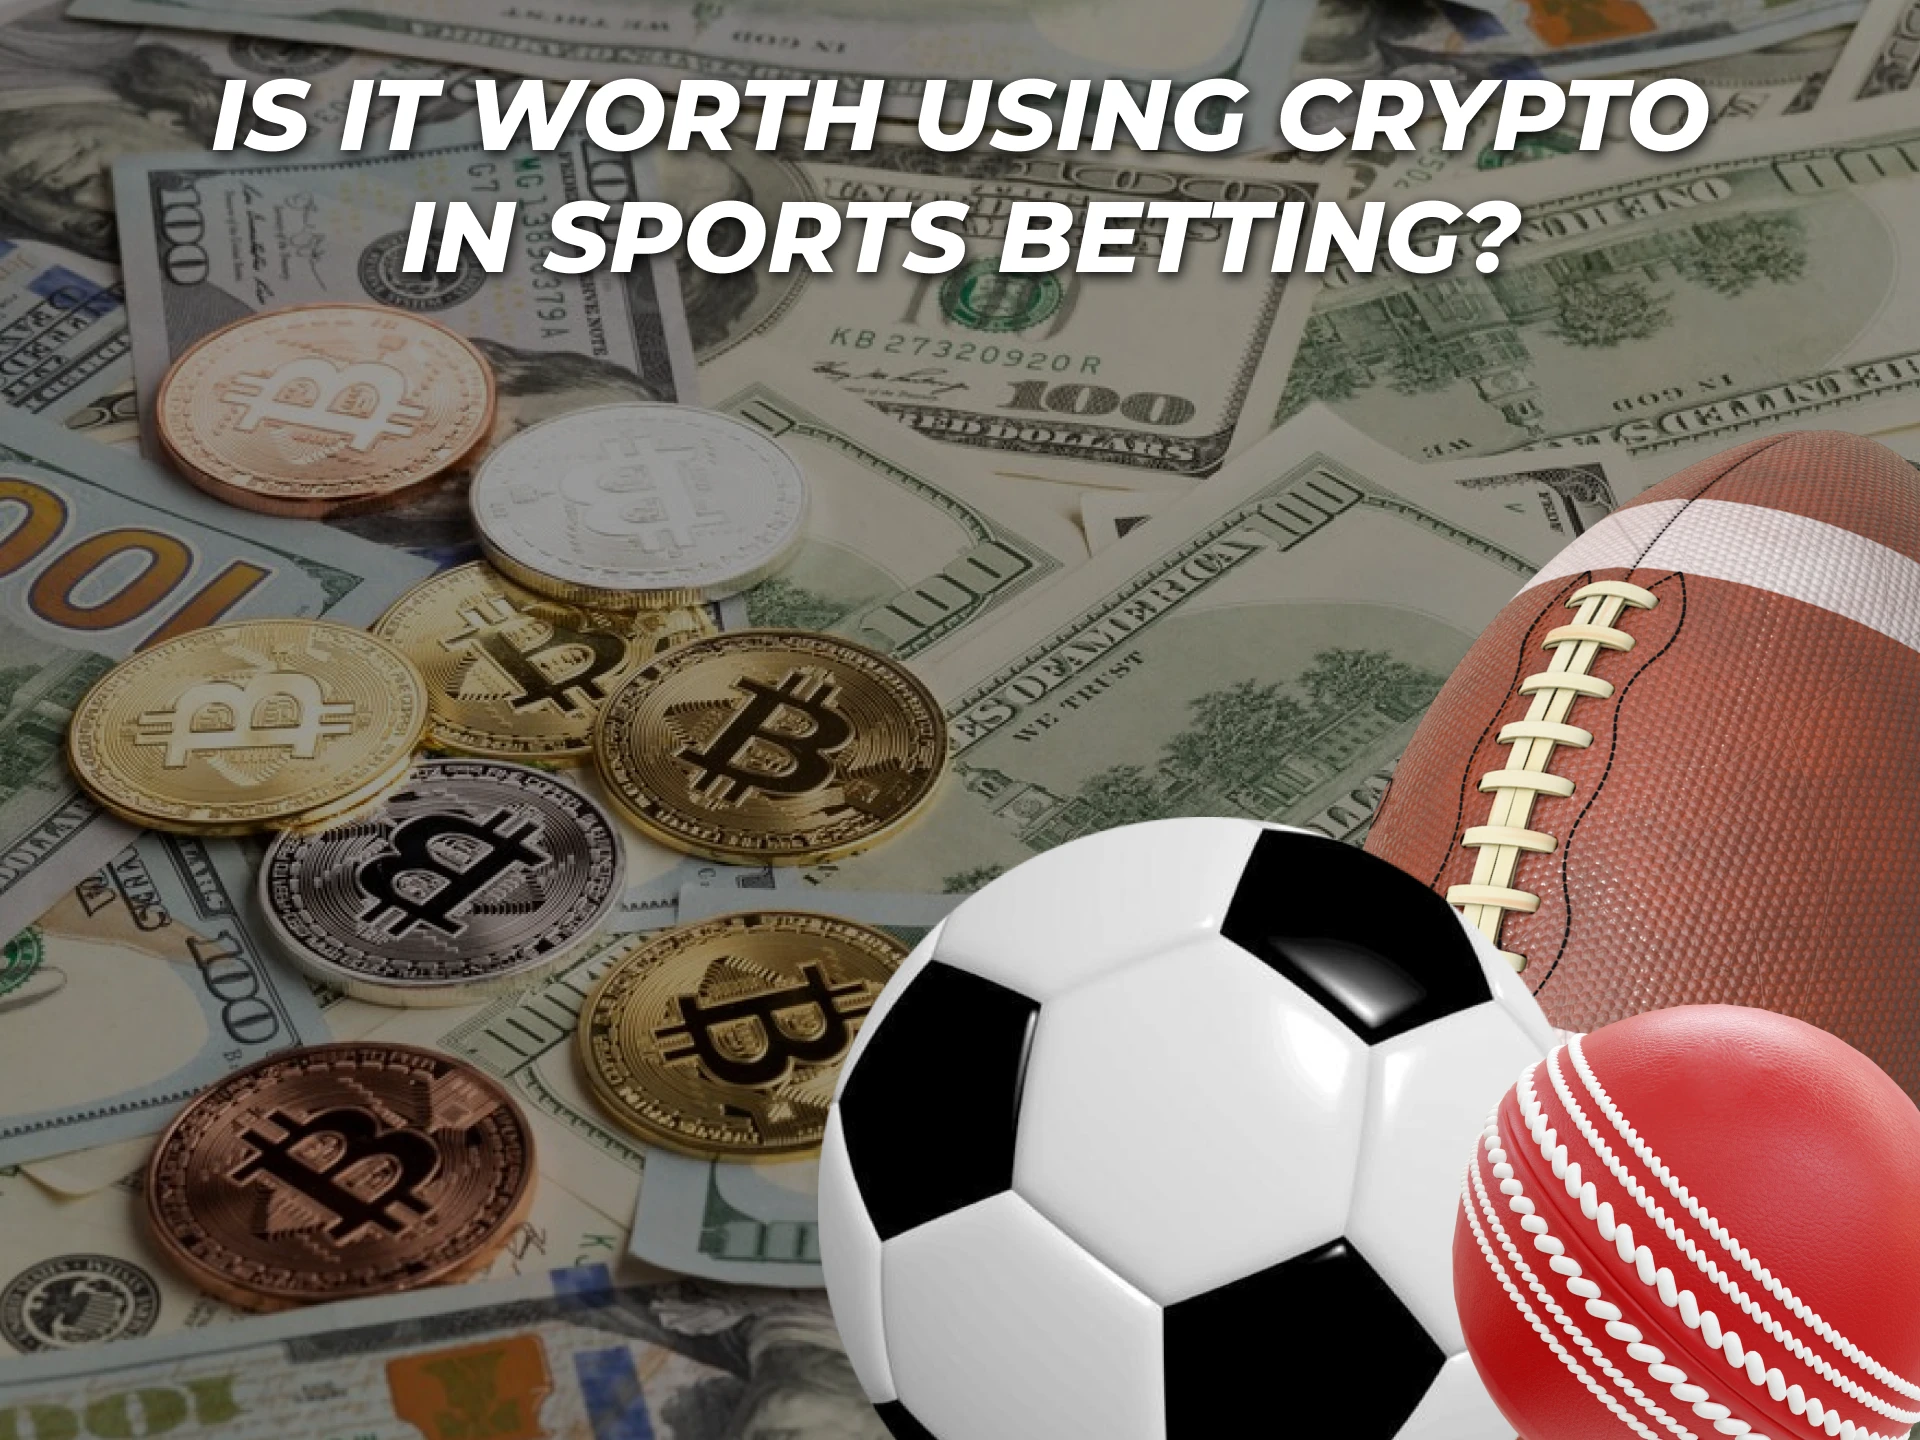 Make your own decision about whether to bet on sports using cryptocurrency.